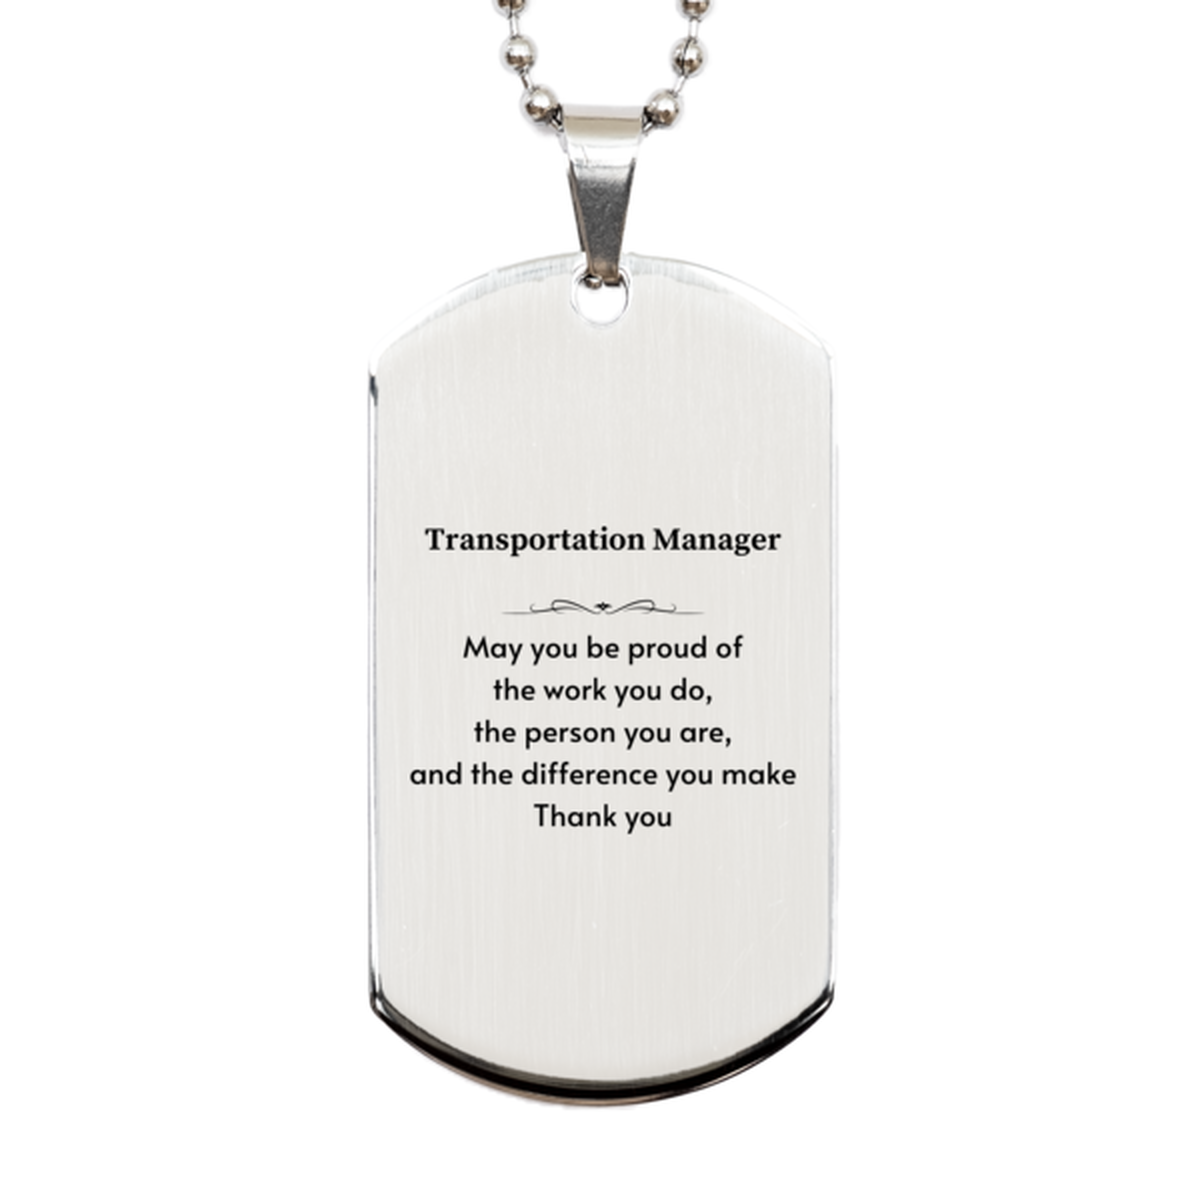 Heartwarming Silver Dog Tag Retirement Coworkers Gifts for Transportation Manager, Transportation Manager May You be proud of the work you do, the person you are Gifts for Boss Men Women Friends